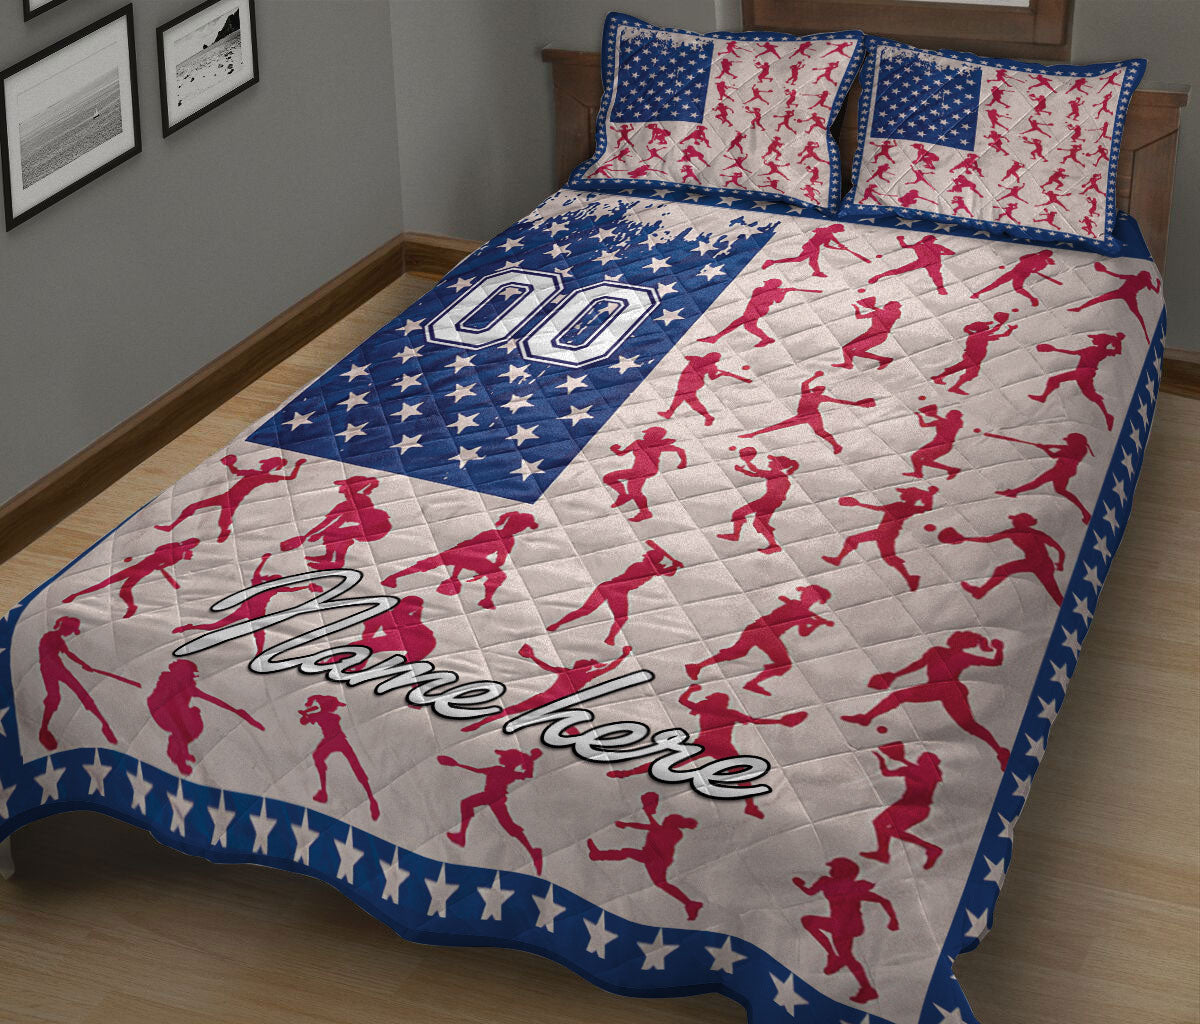 Ohaprints-Quilt-Bed-Set-Pillowcase-Baseball-Softball-Girl-Player-Posing-Us-Flag-Custom-Personalized-Name-Number-Blanket-Bedspread-Bedding-252-King (90'' x 100'')